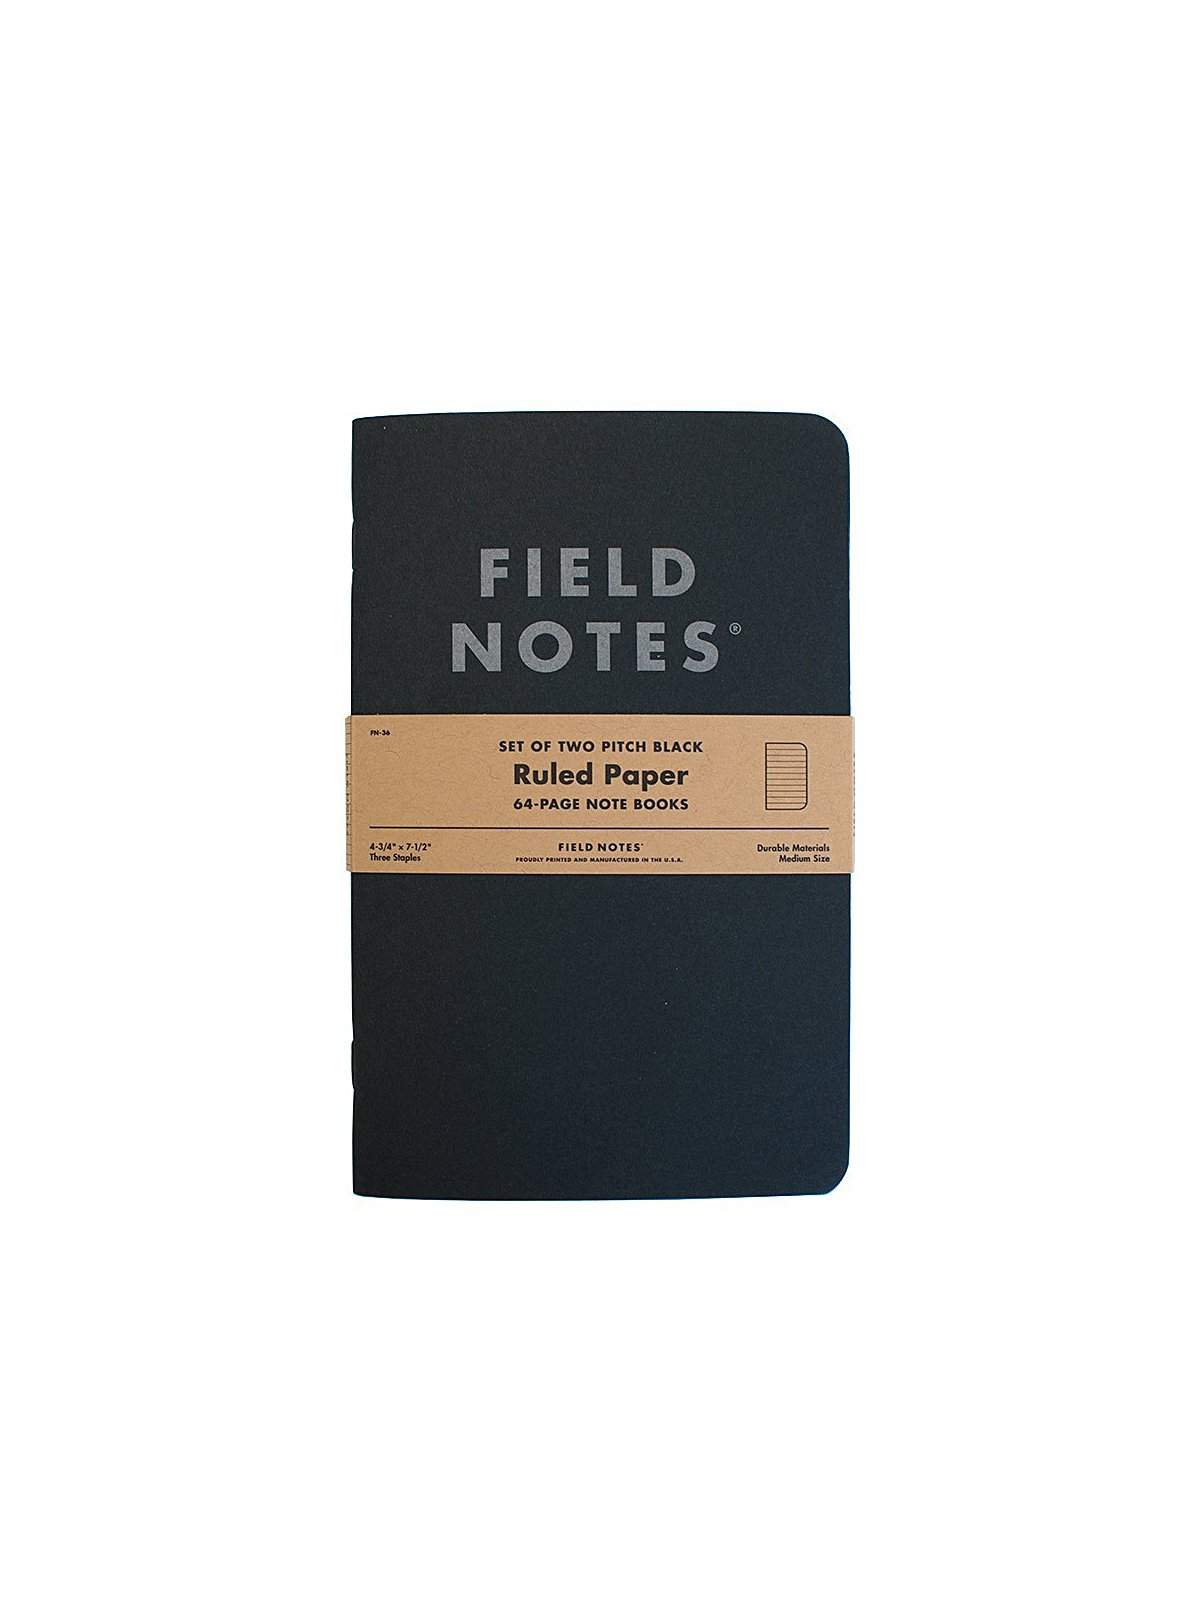 Field Notes Pitch Black Note Book 2 Pack Ruled Paper - MORE by Morello Indonesia